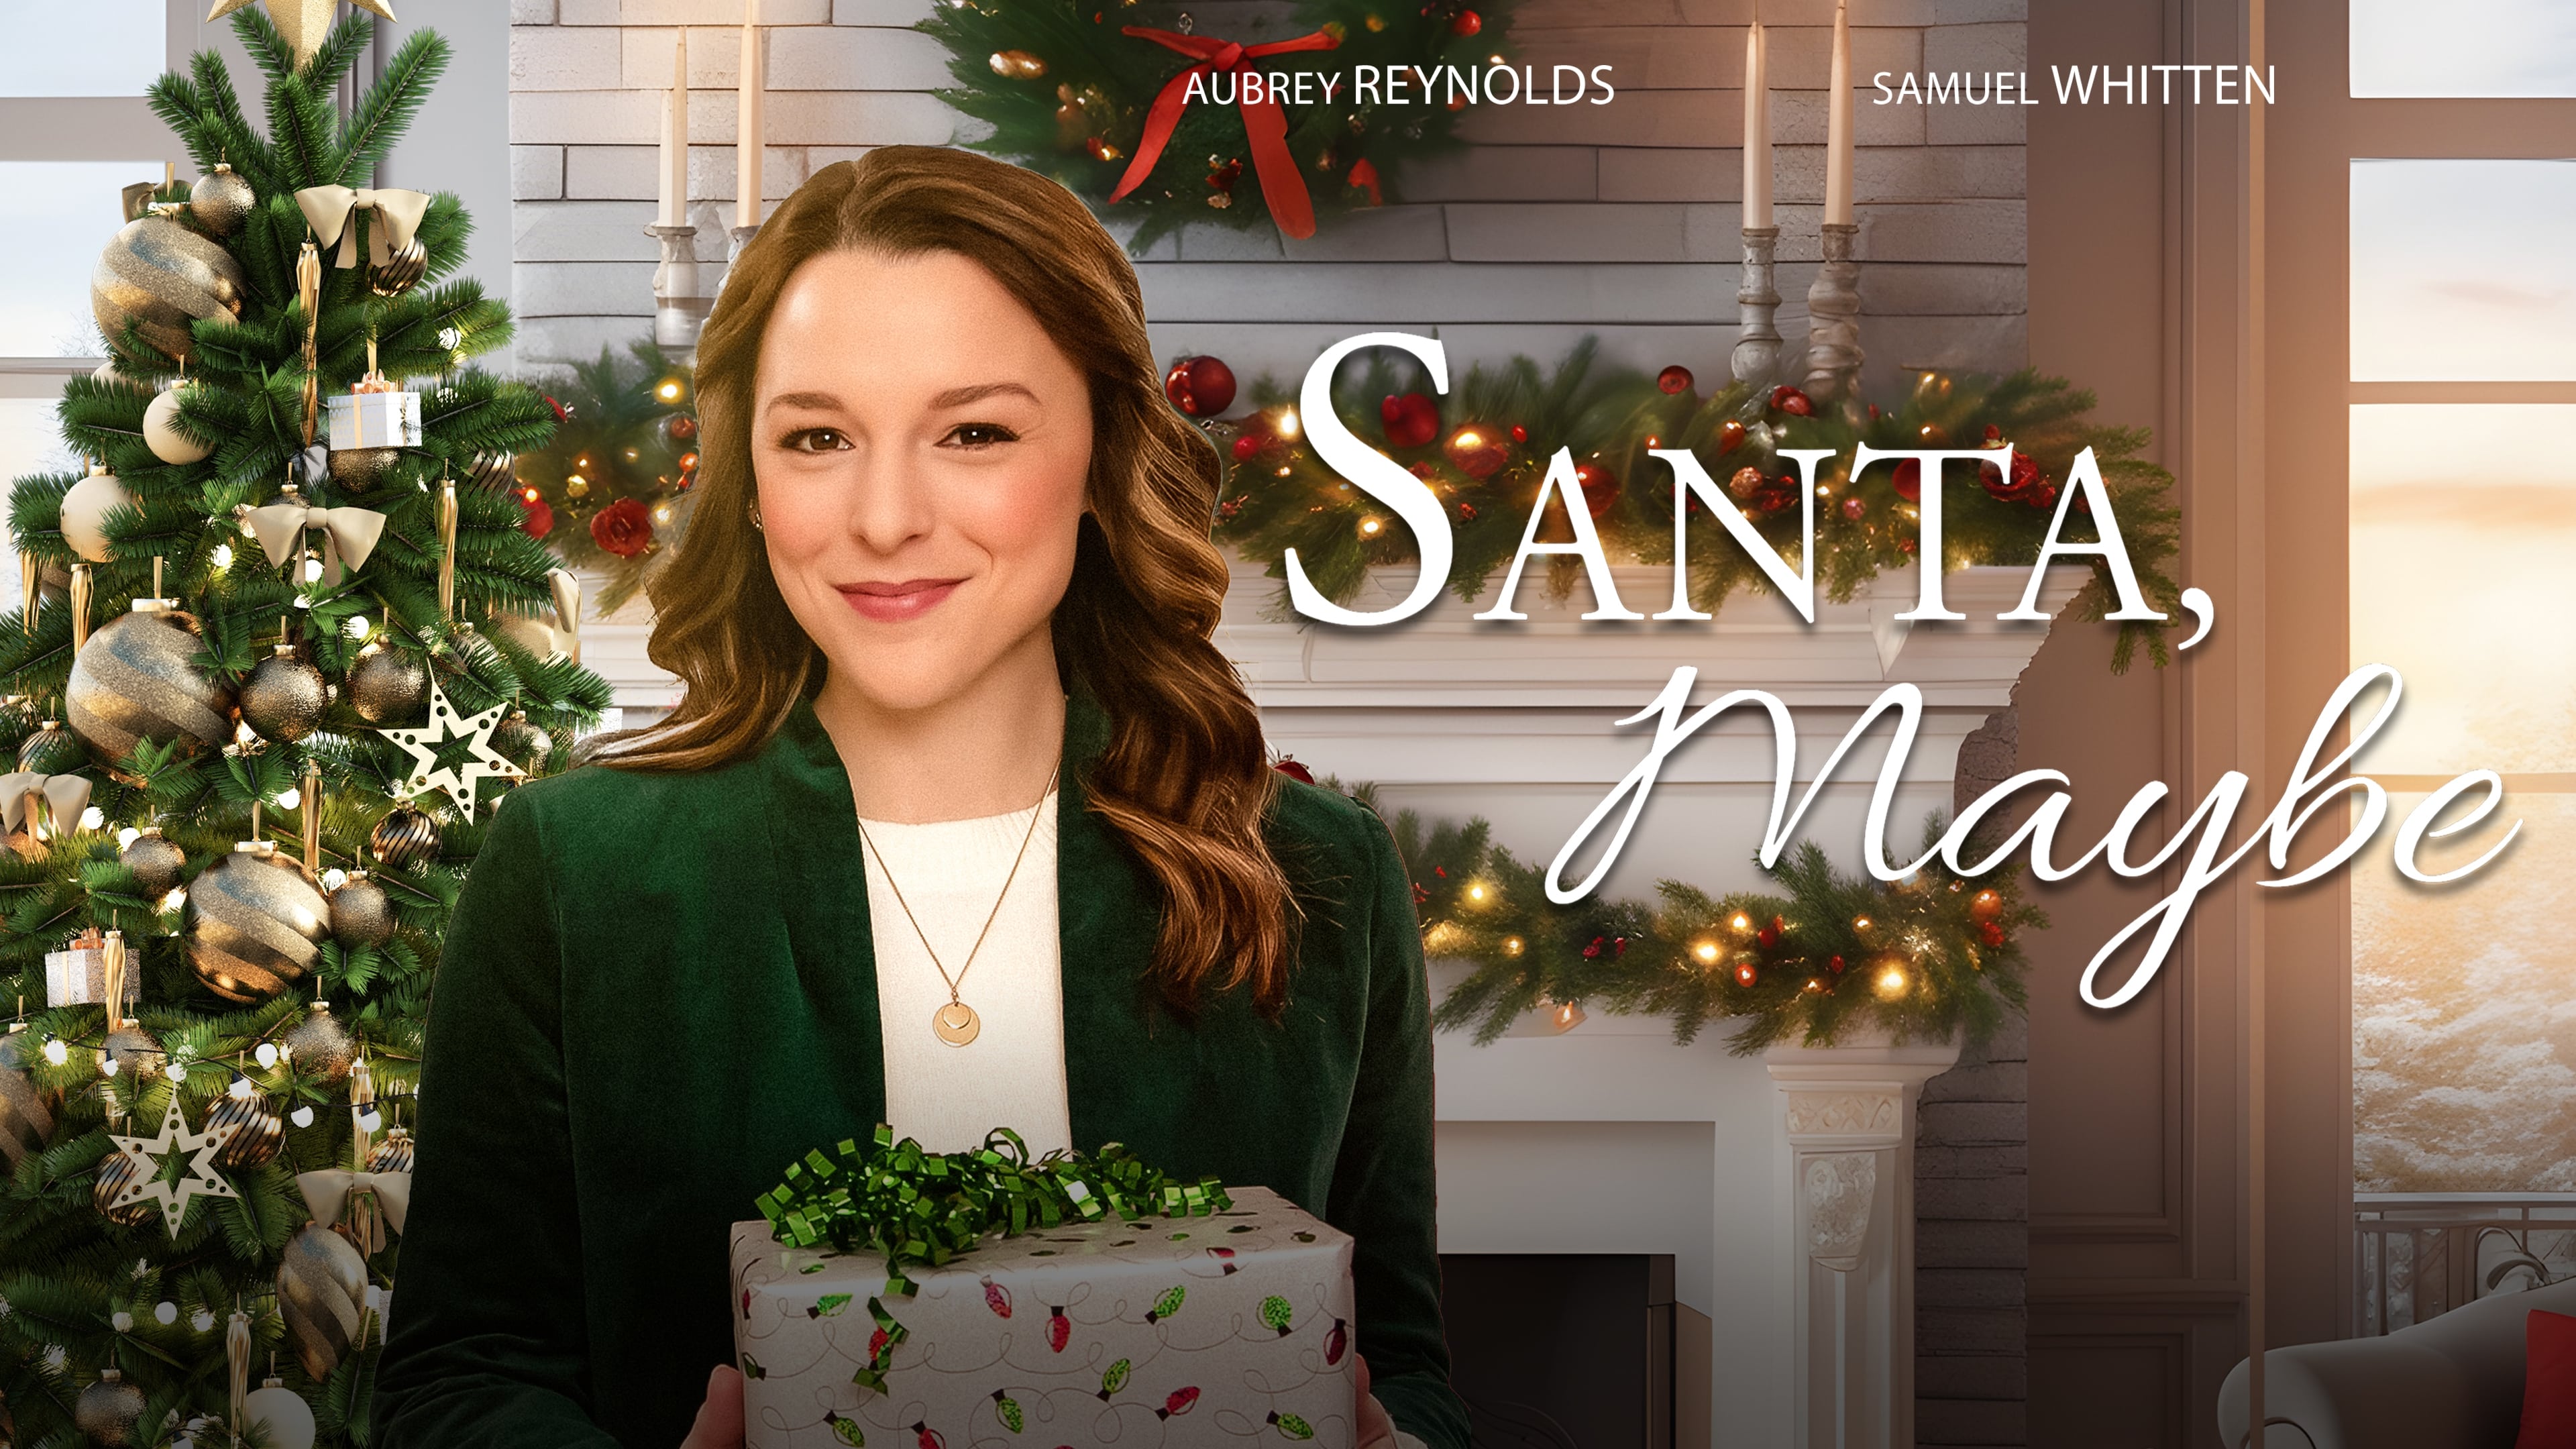 "Santa, Maybe" airs as part of Great American Family's Great american Christmas on Nov. 18.